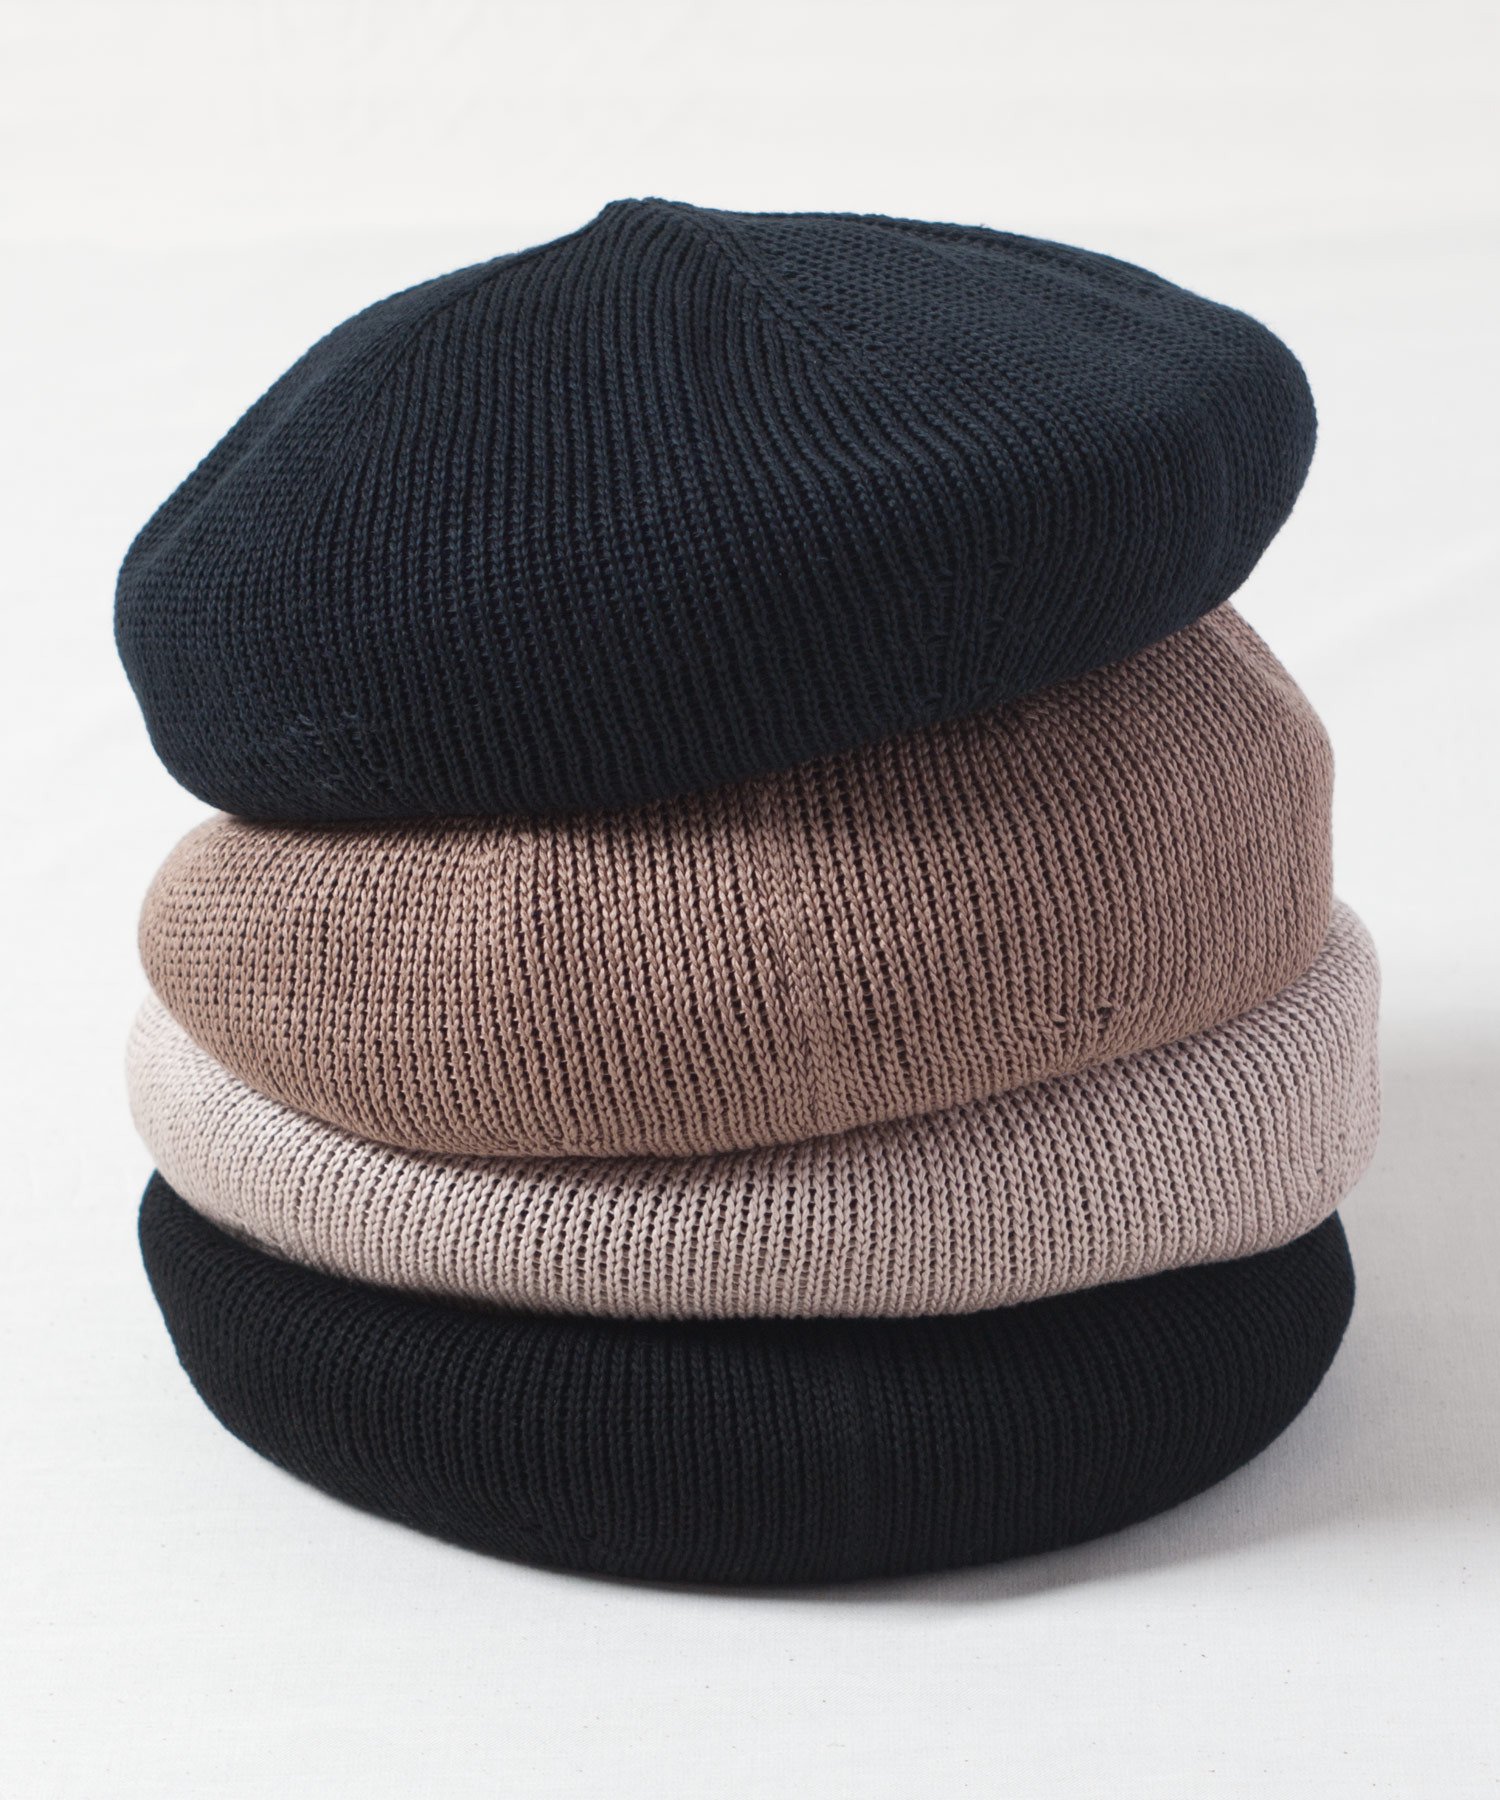 <img class='new_mark_img1' src='https://img.shop-pro.jp/img/new/icons15.gif' style='border:none;display:inline;margin:0px;padding:0px;width:auto;' />【Racal】 SU2 Cotton Knit Beret / SU2 コットンニットベレー